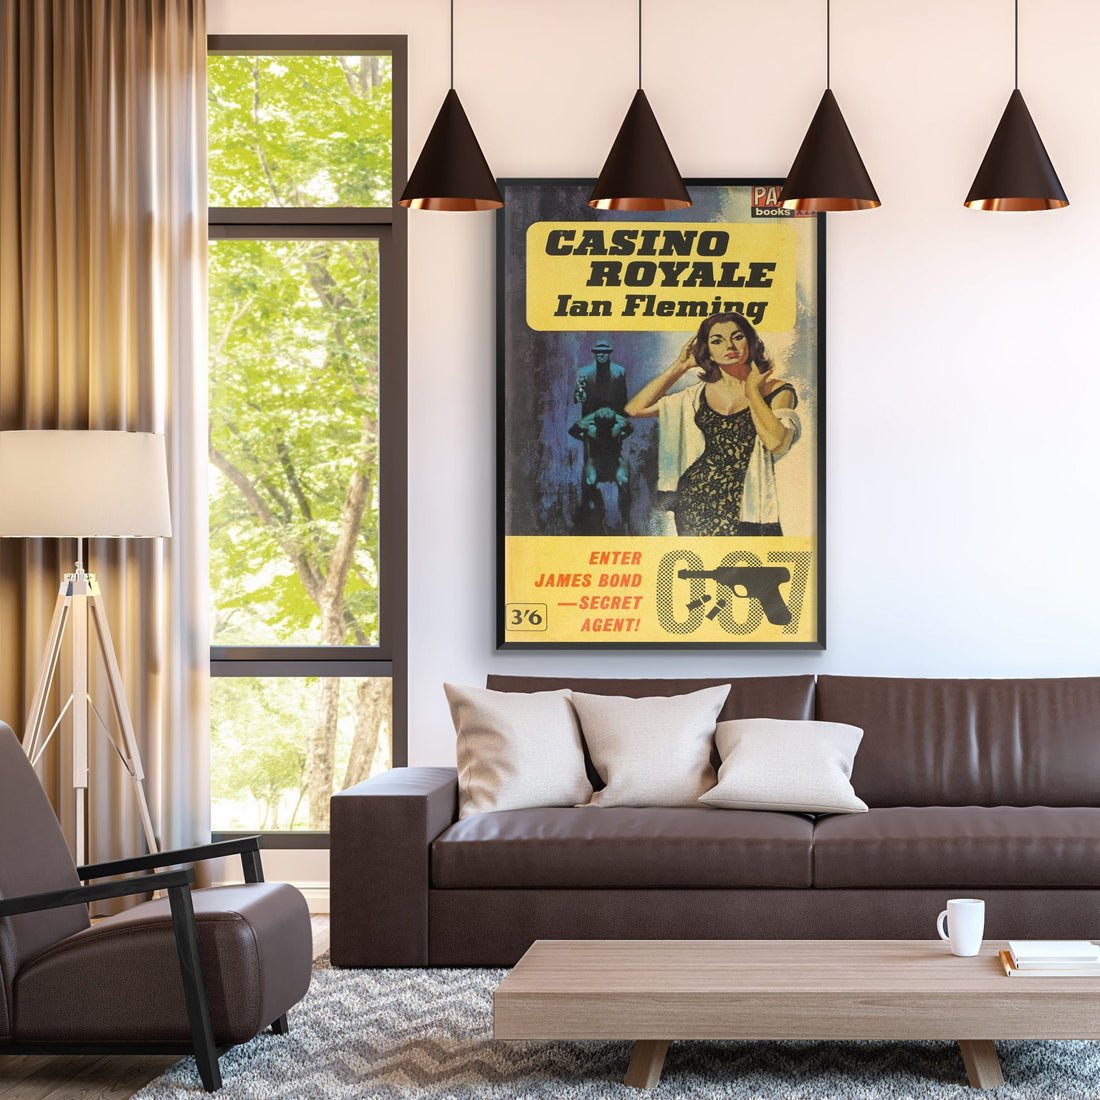 Picture Framing for Movie Posters, Prints and Memorabilia